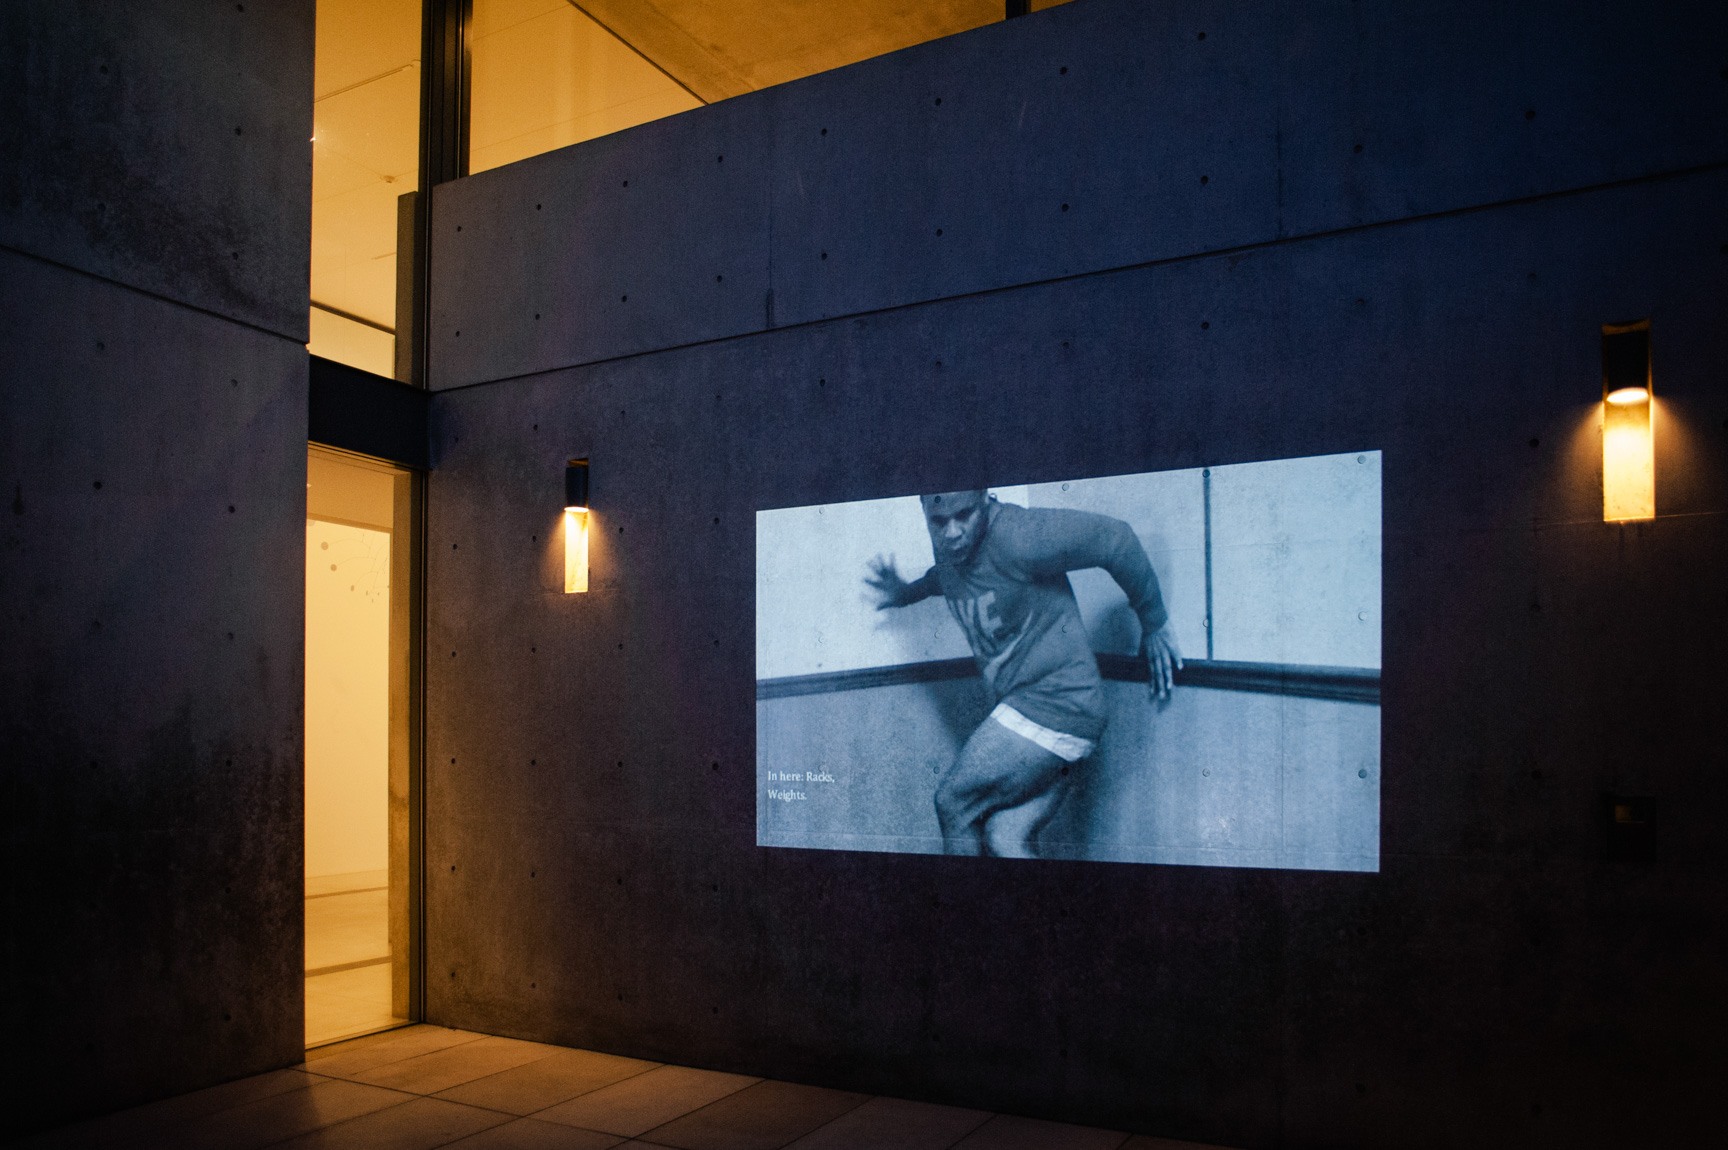 A black and white film projected on the concrete wall outside in the entryway.